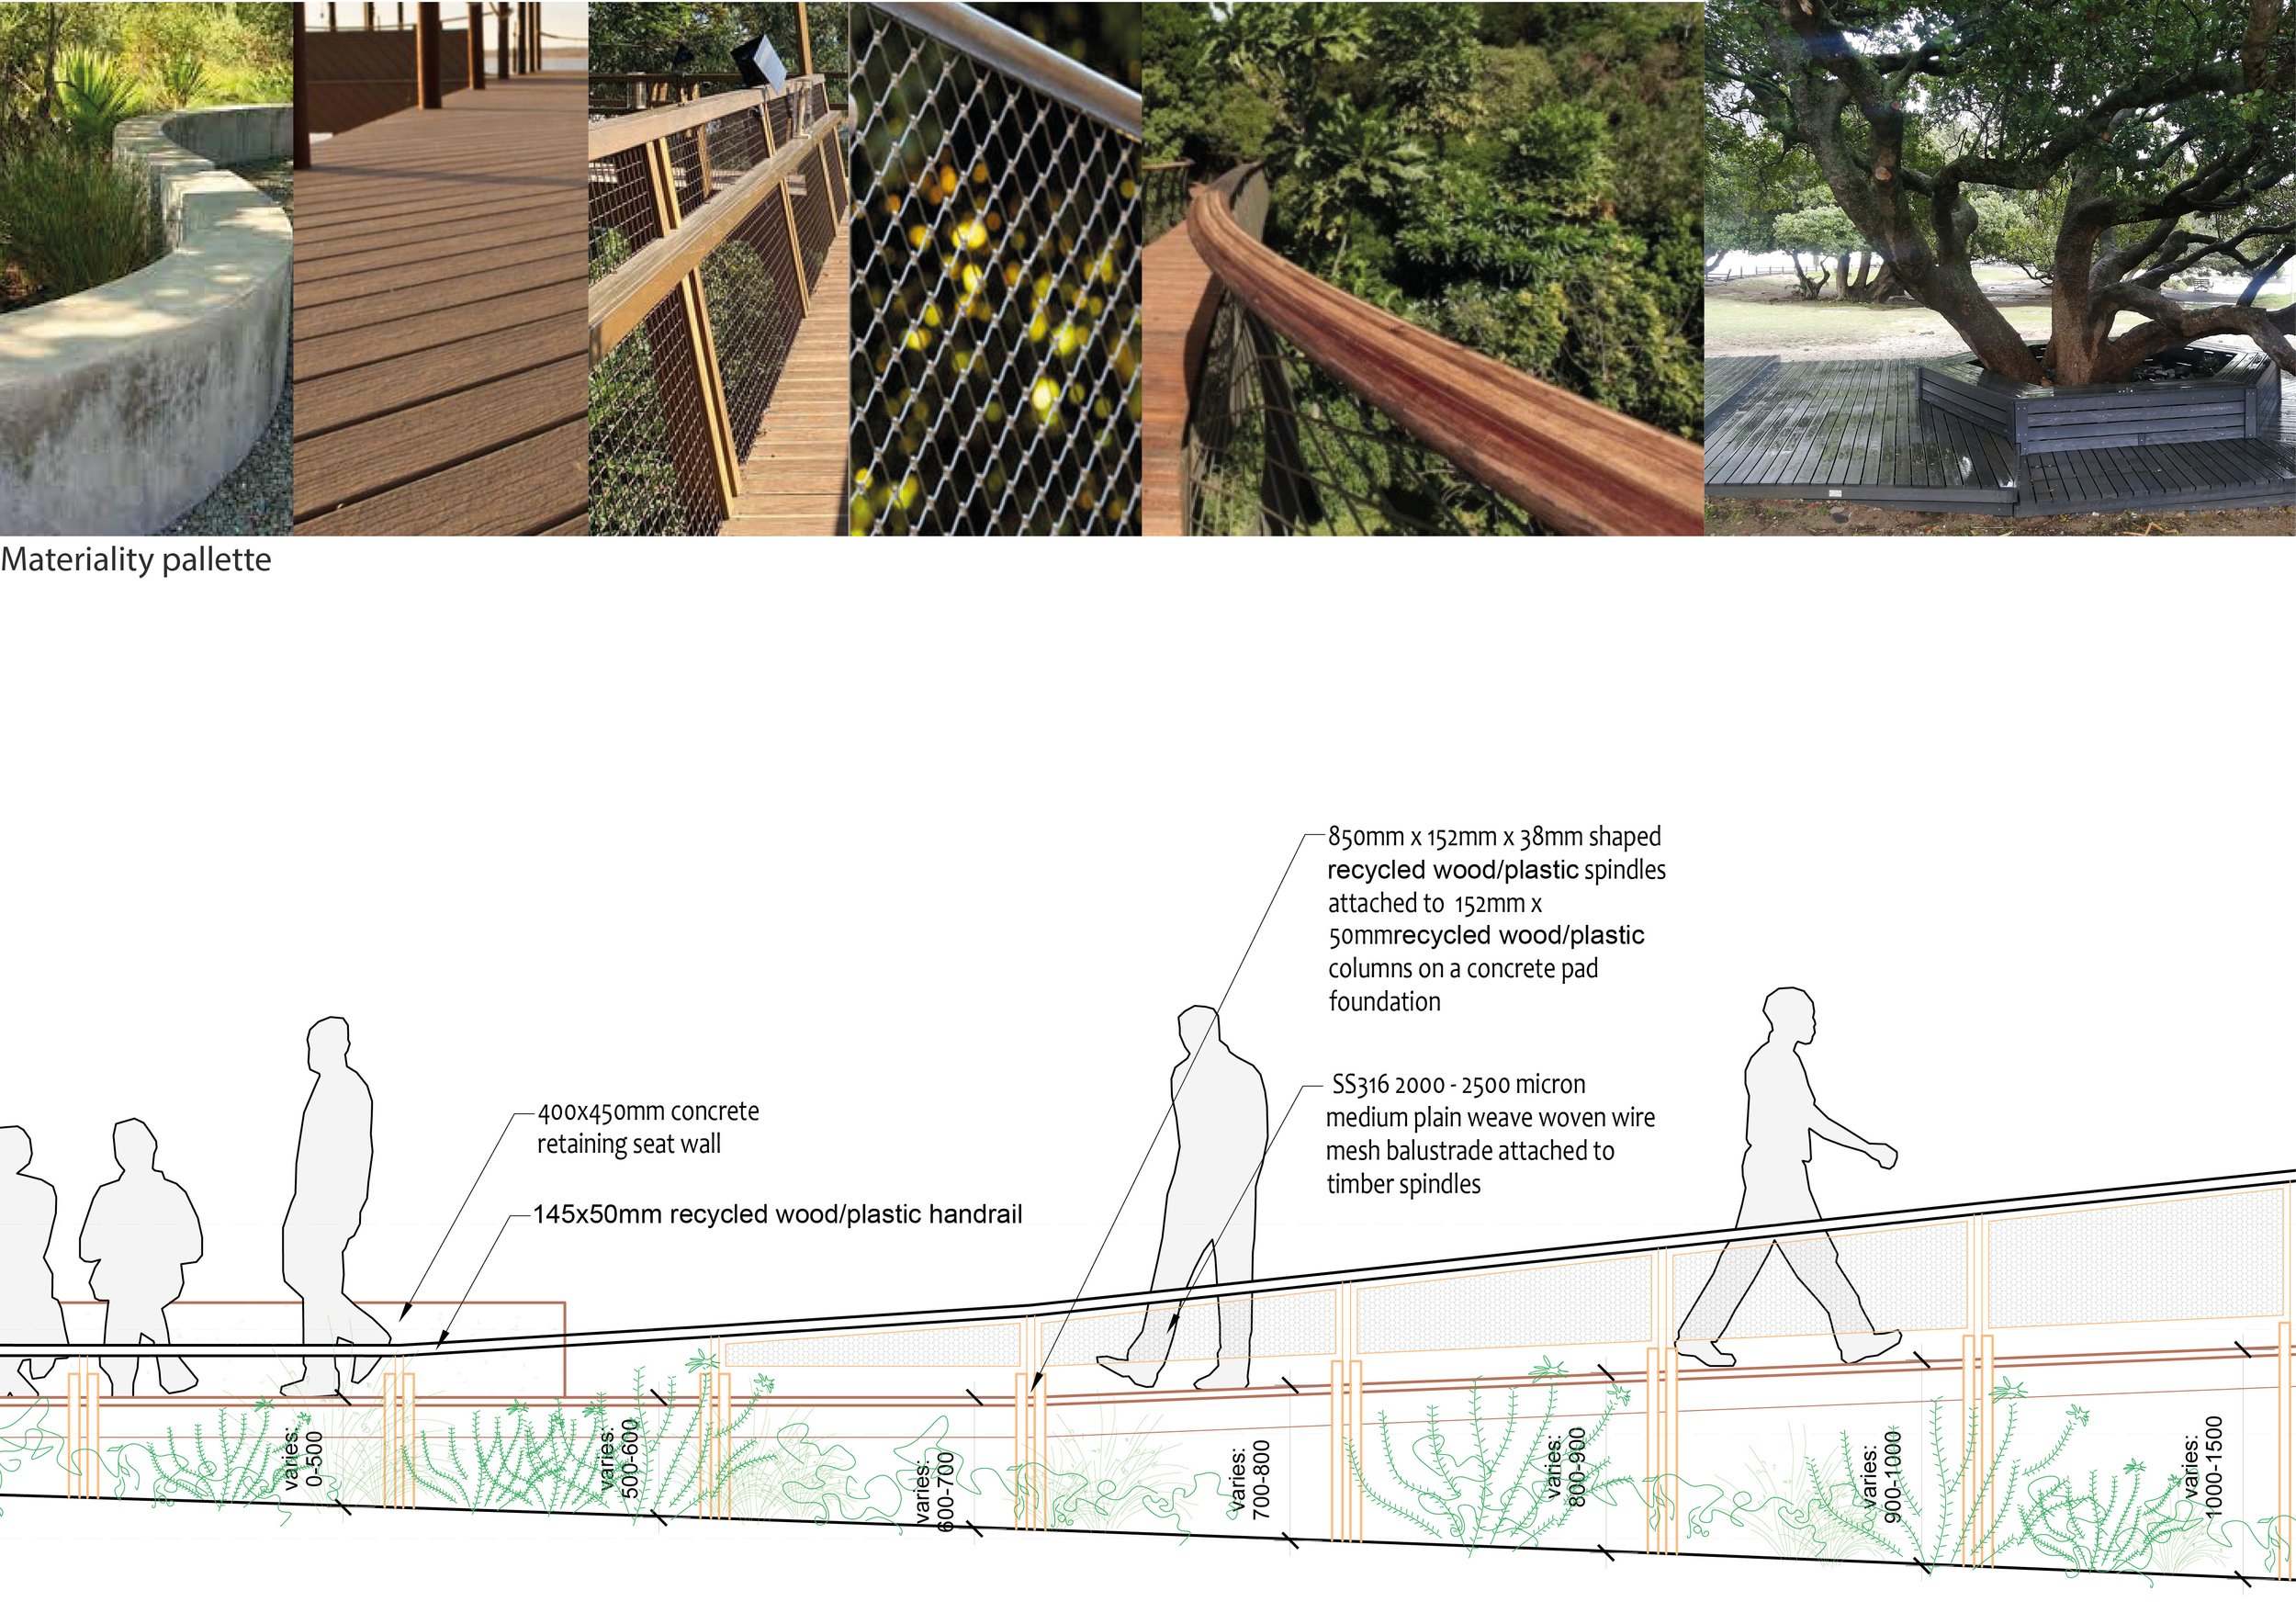  The boardwalk is proposed to be constructed using robust materials that will require little maintenance, be vandal proof, while still being attractive, unique and ‘light weight’.    A combination of recycled timber or plastic ‘polyplank’ decking and